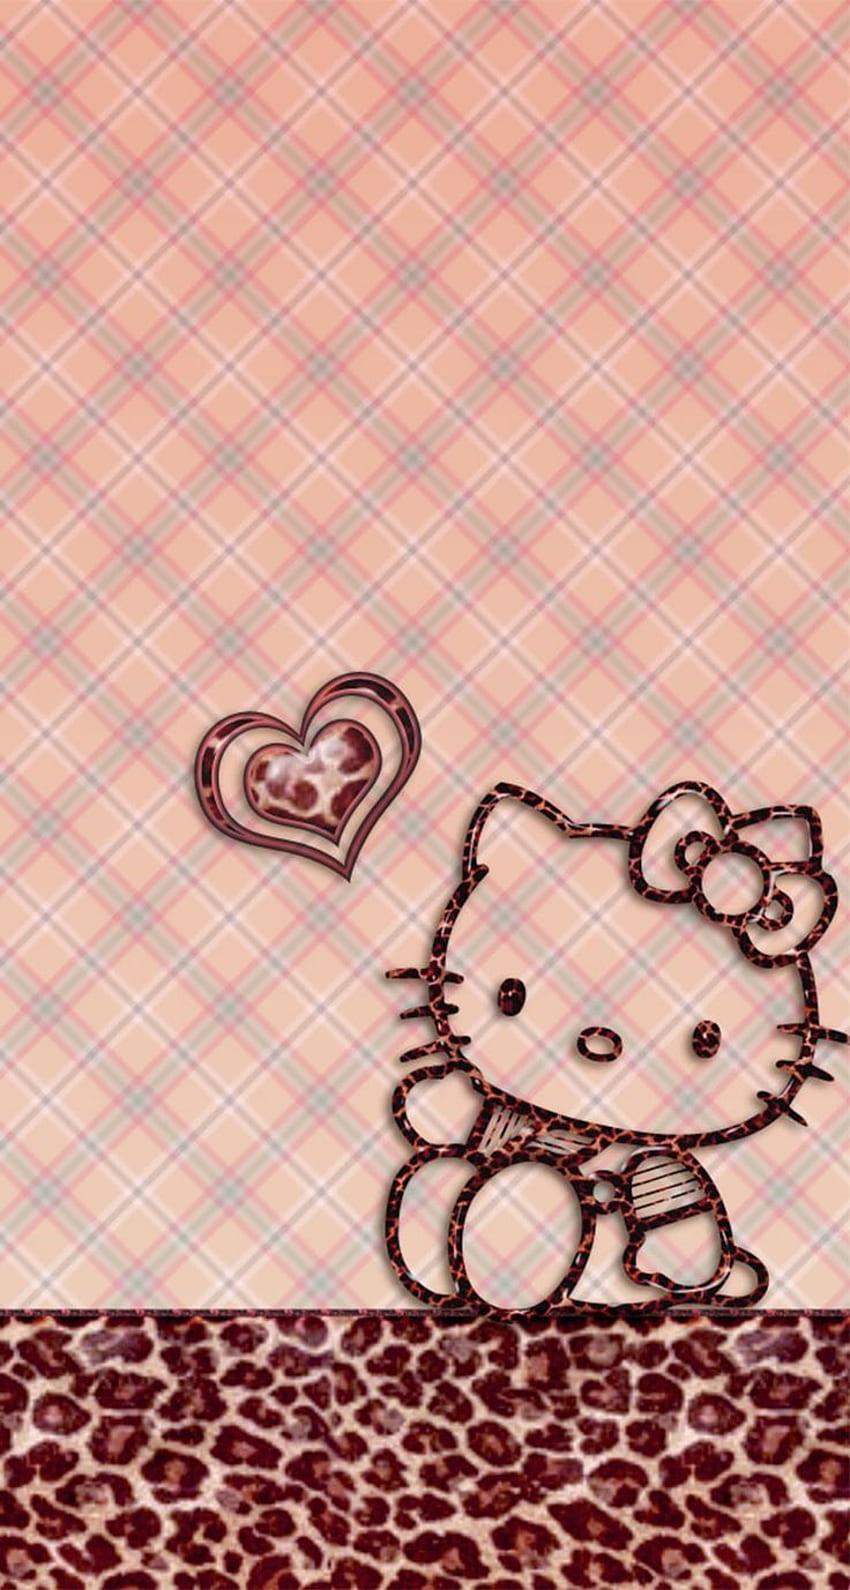 Hello Kitty on X: Take this iconic duo on the go with new backgrounds for  your phone 📱💕 Download your favorite wallpaper here:   #HelloKittyxPusheen  / X